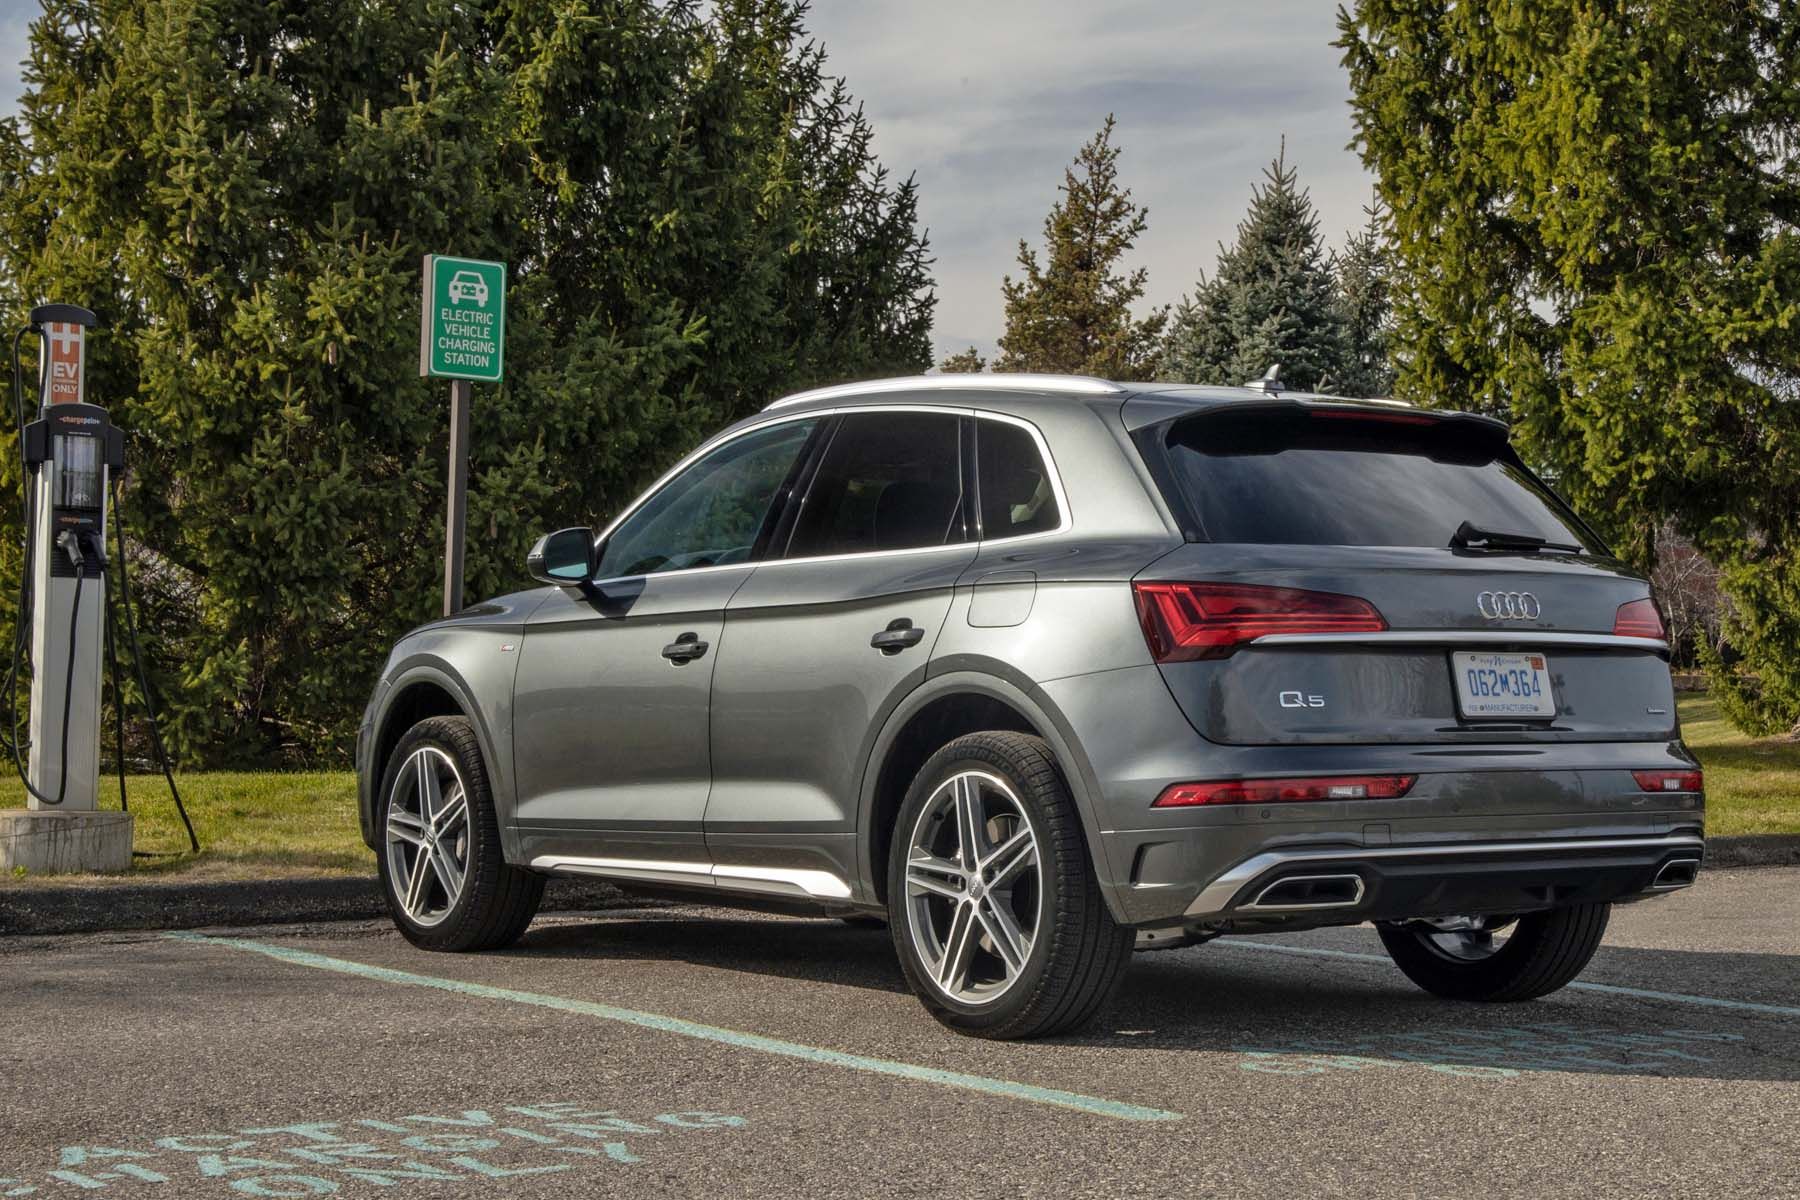 The prices of power in Audi's evolving SUV lineup